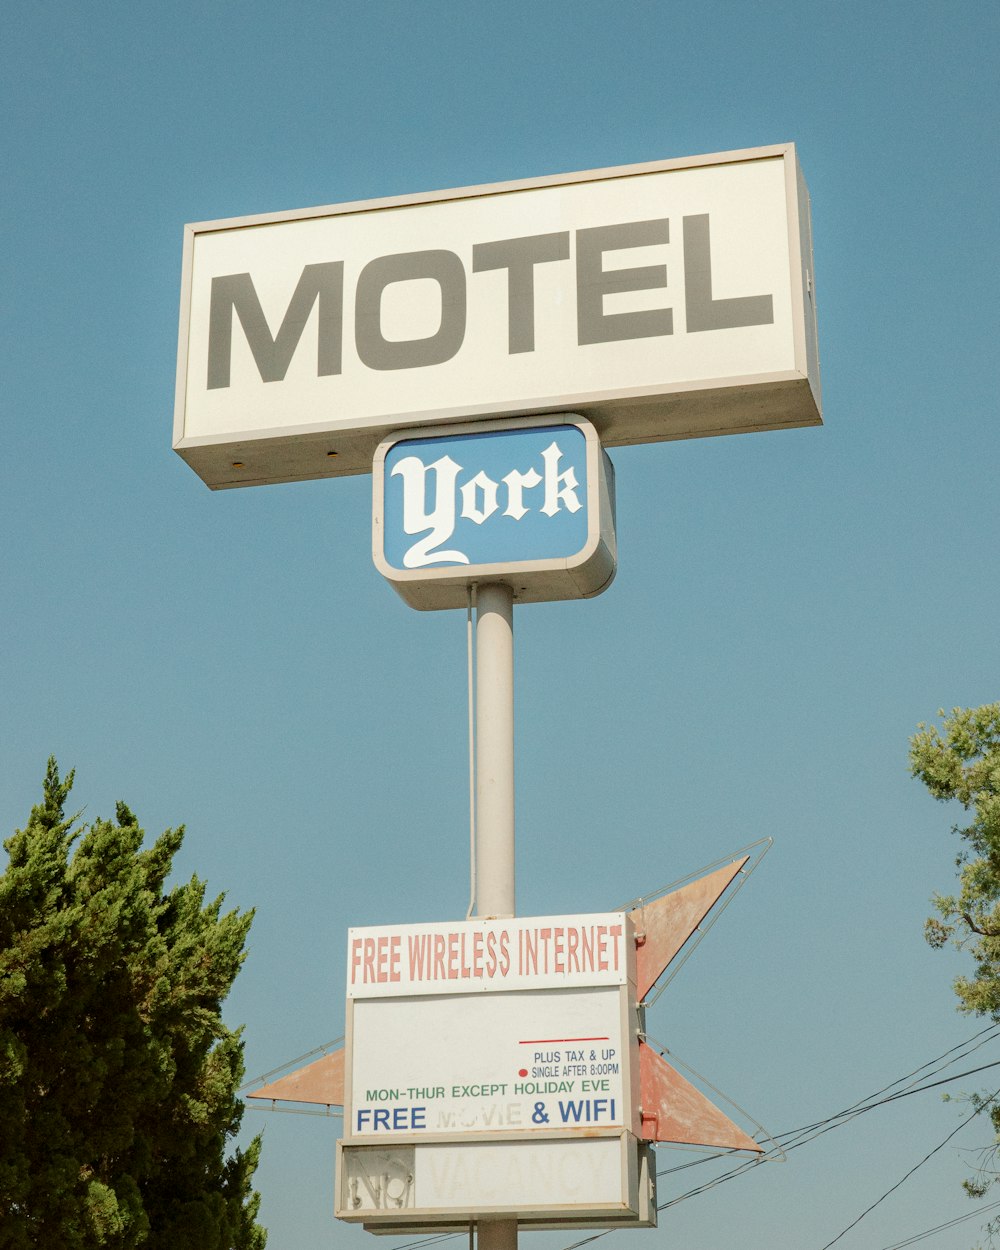 a motel sign with a free wireless internet sign below it